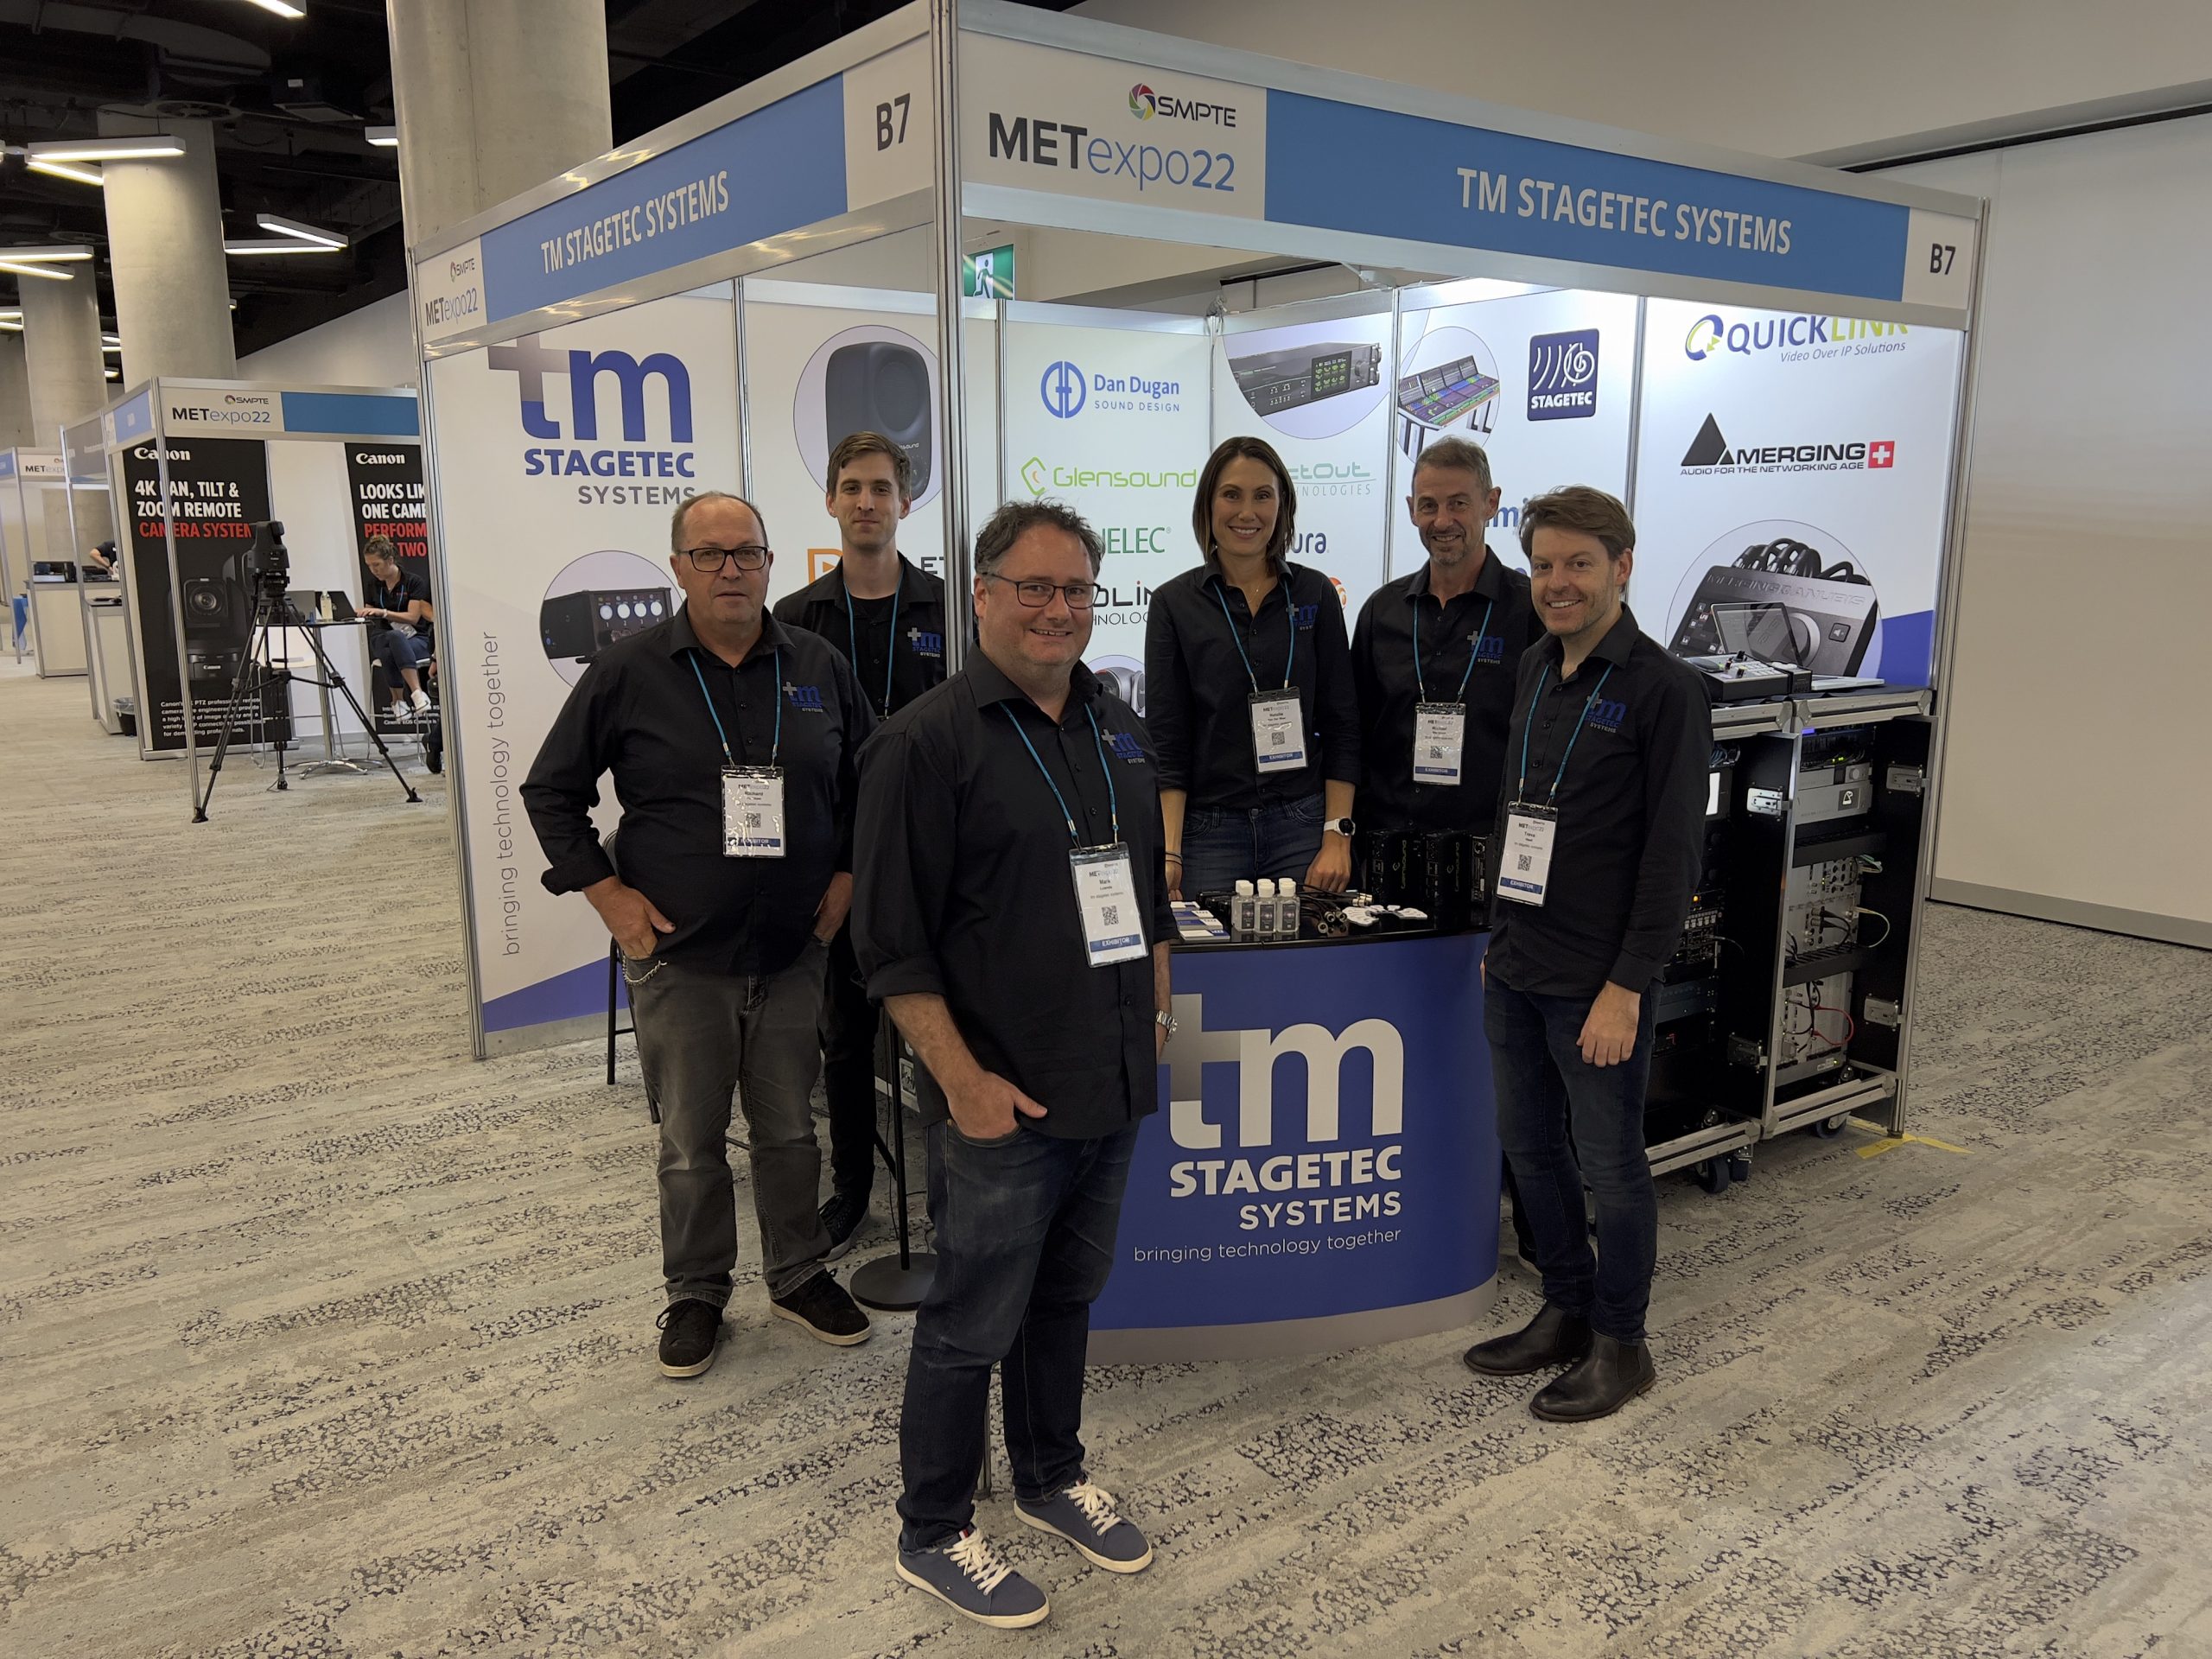 TMS MET Expo 2022 - Wrap Up tm stagetec systems - tm stagetec